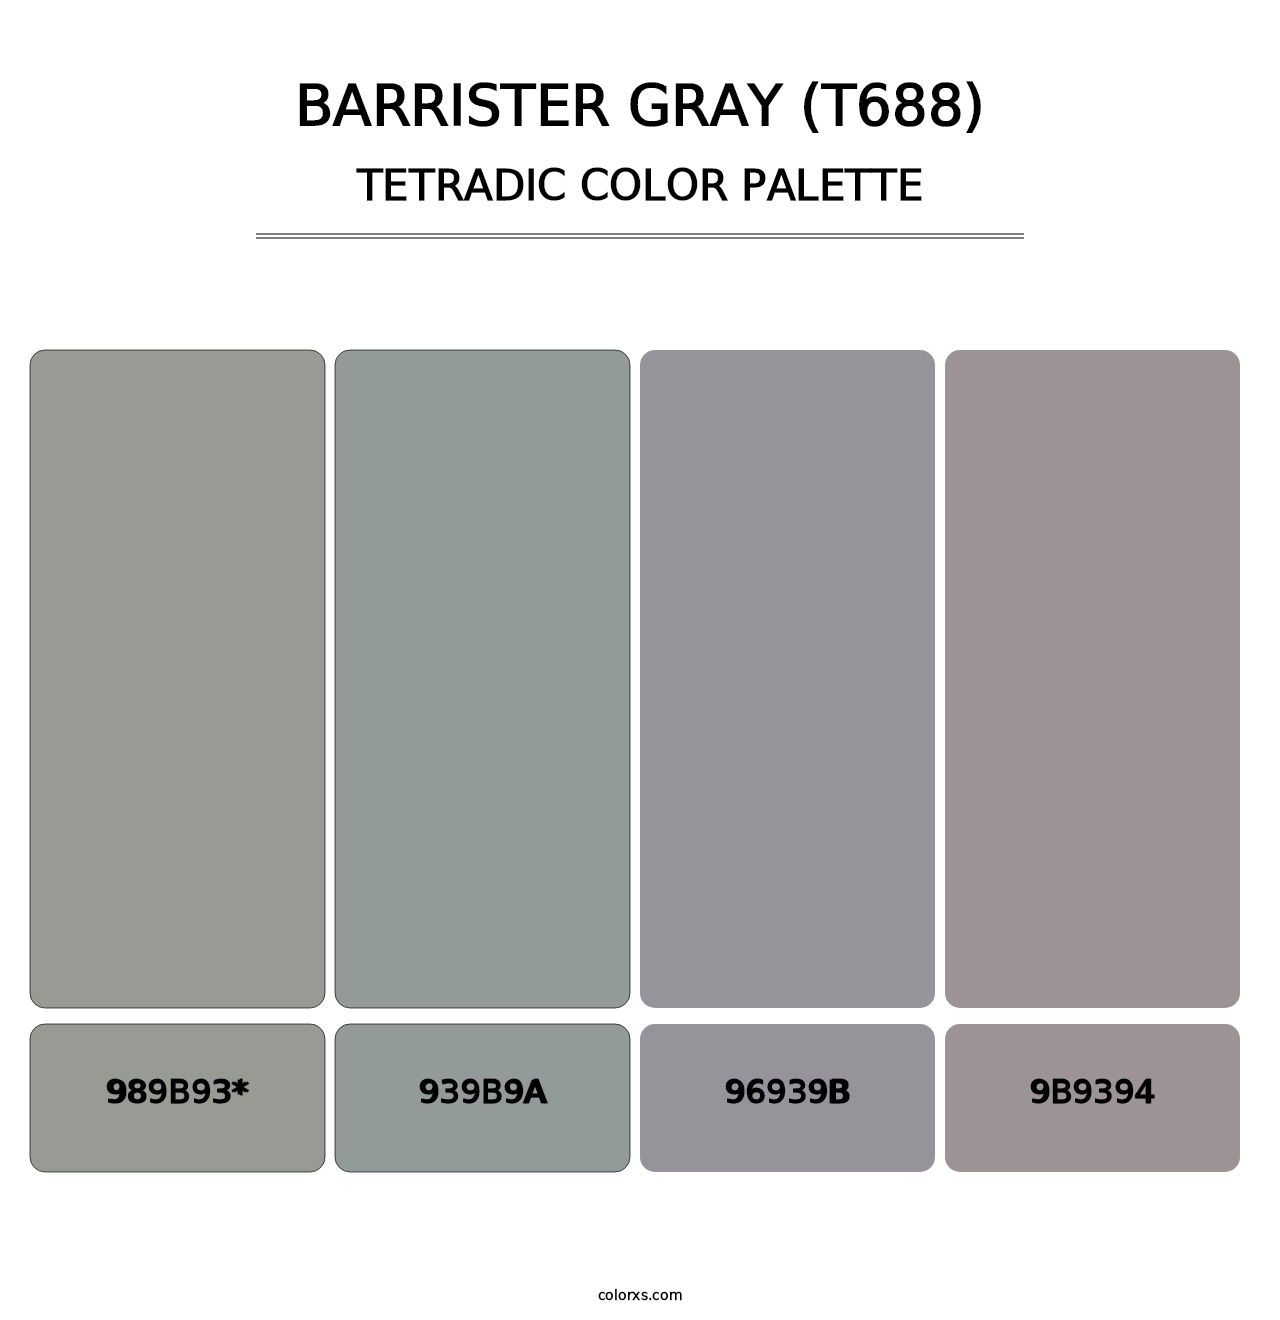 Barrister Gray (T688) - Tetradic Color Palette